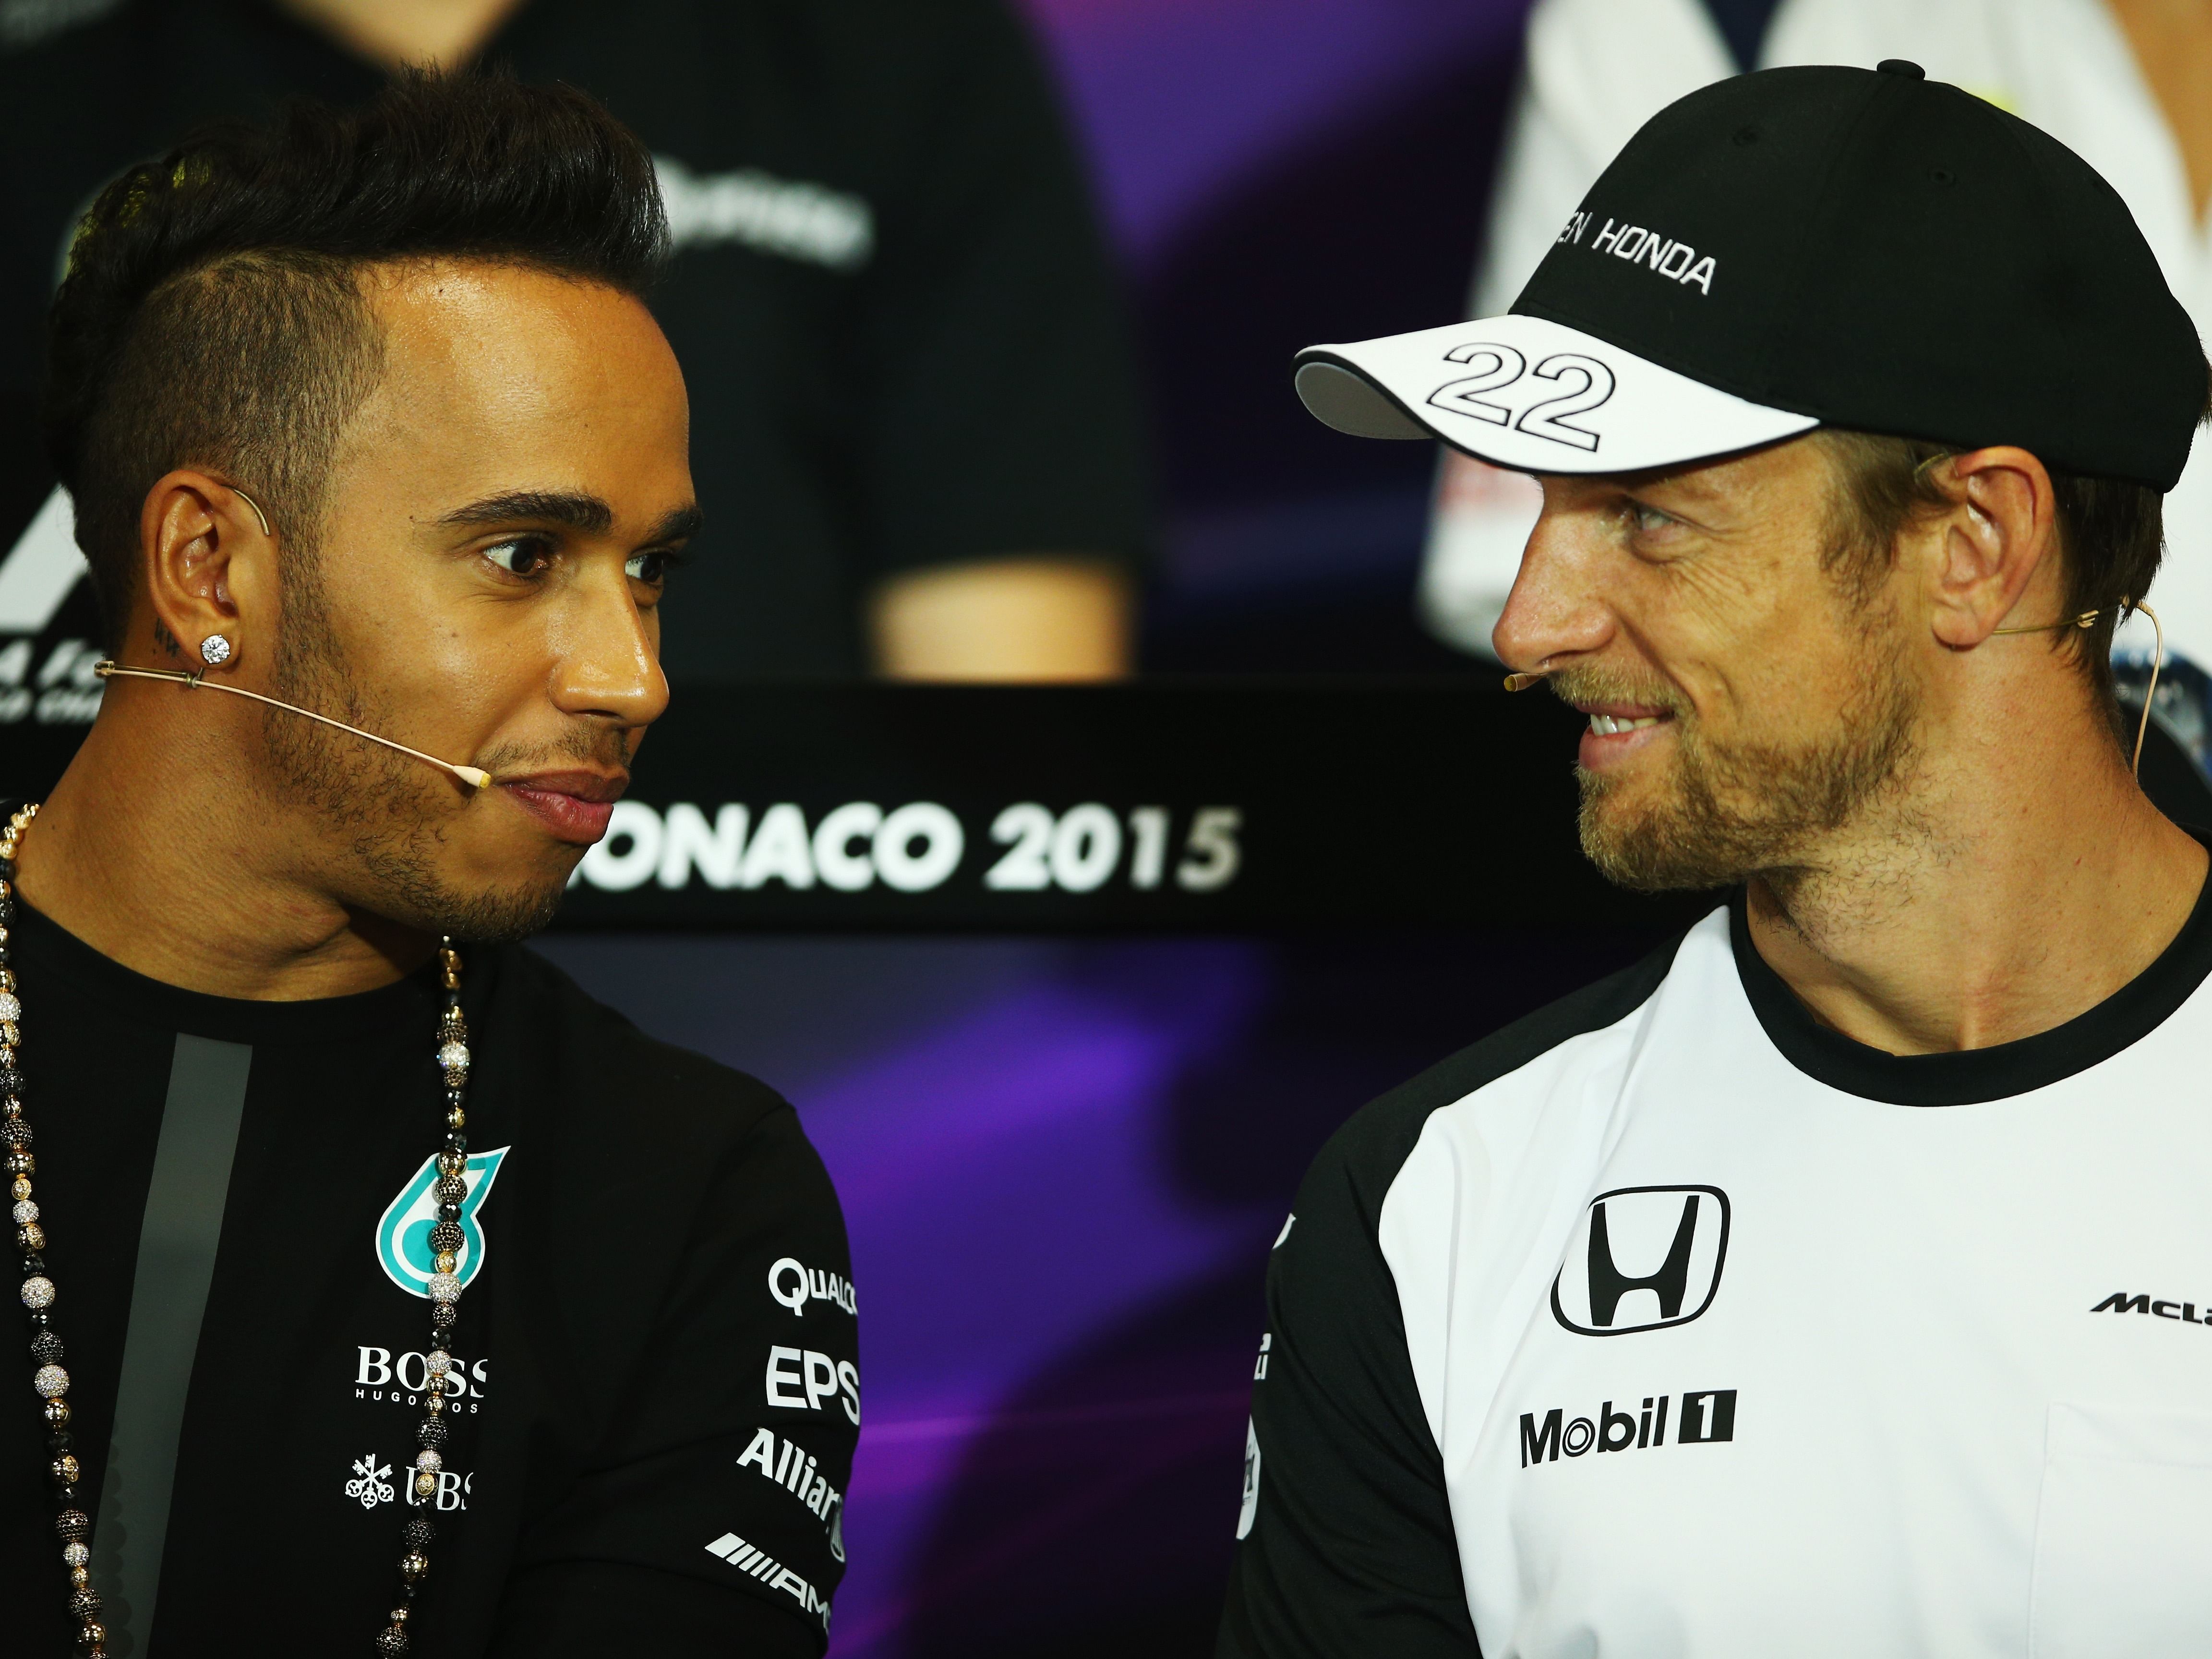 Lewis Hamilton and Jenson Button talking during the drivers press conference during previews to the 2015 F1 Monaco Grand Prix. (Photo by Paul Gilham/Getty Images)